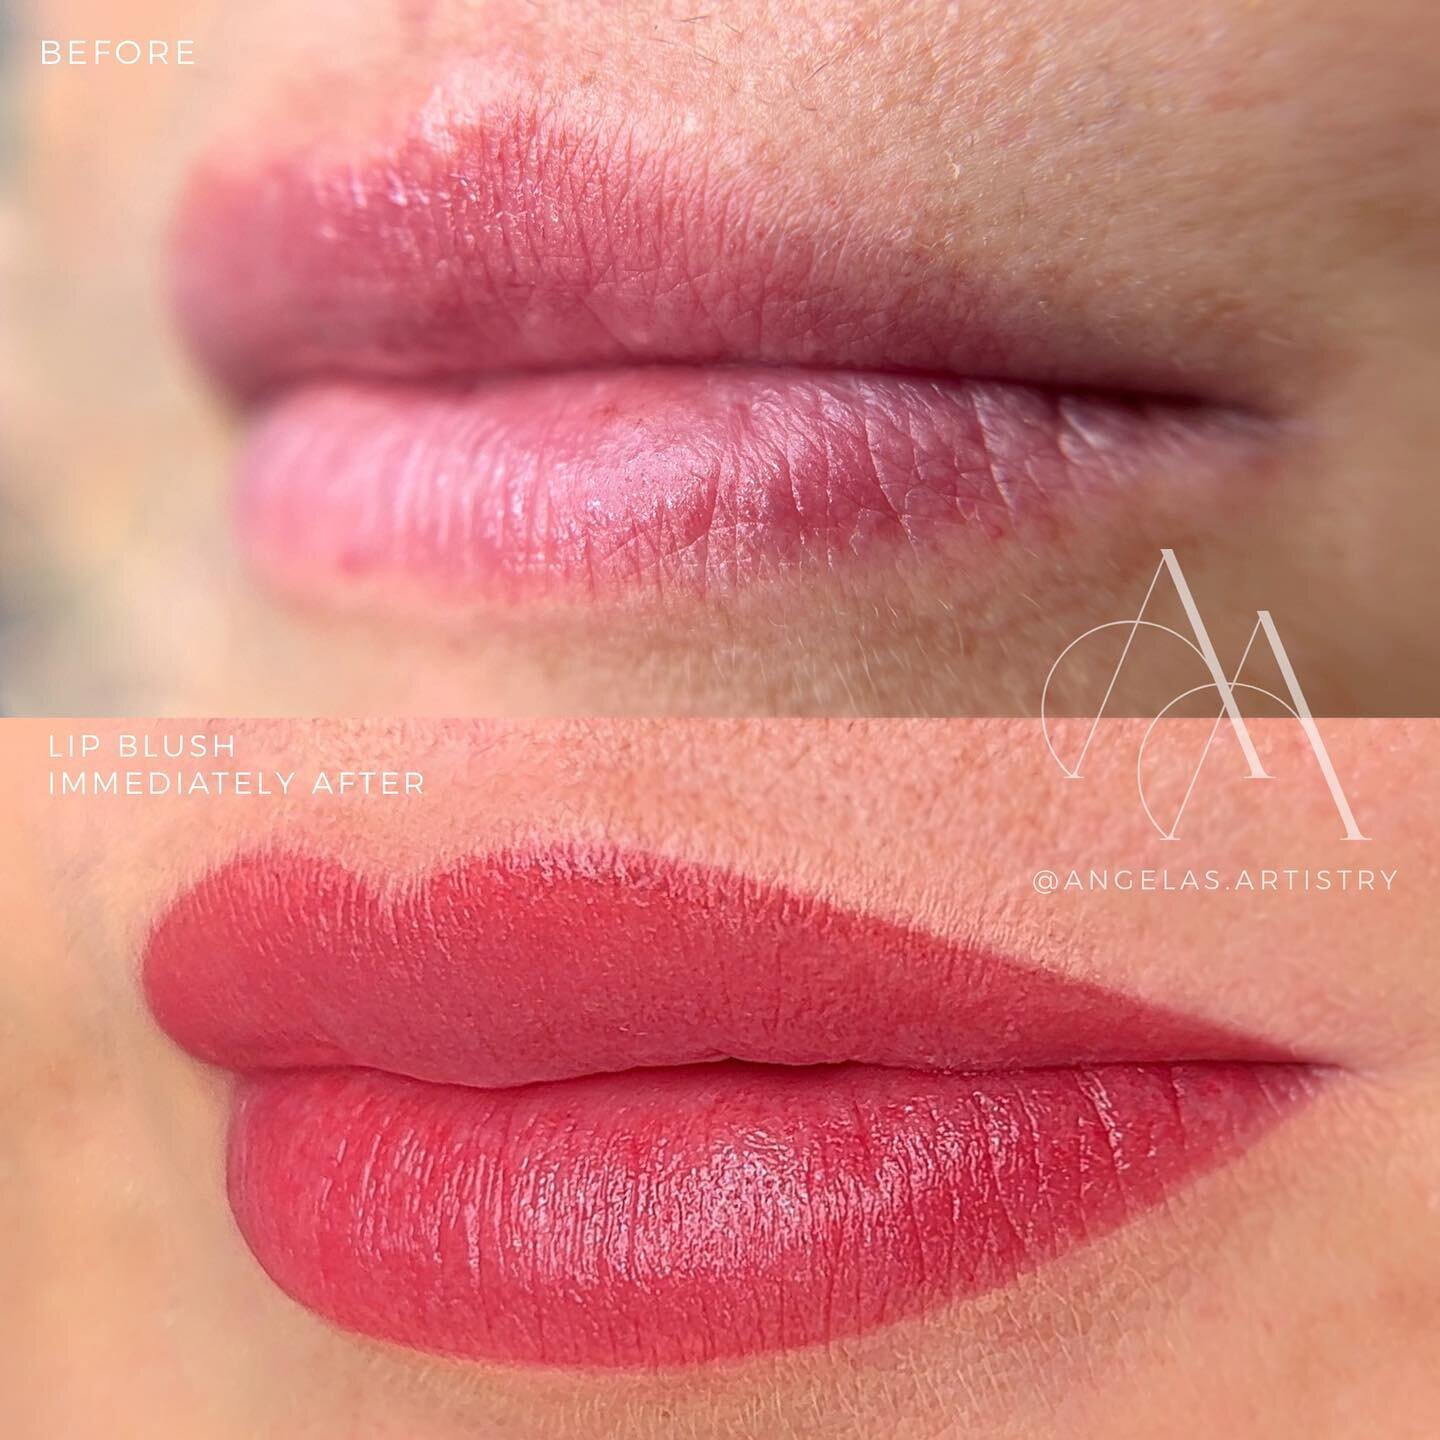 Lip Blush 

Our goal is to redefine the lips and evening out the colour. Can&rsquo;t wait to see these healed 💕

__________________________________________

𝘼𝙥𝙥𝙤𝙞𝙣𝙩𝙢𝙚𝙣𝙩 𝙩𝙞𝙢𝙚: 2.5 - 3 hours

𝙃𝙚𝙖𝙡𝙞𝙣𝙜 𝙩𝙞𝙢𝙚: 5 days, swelling wi